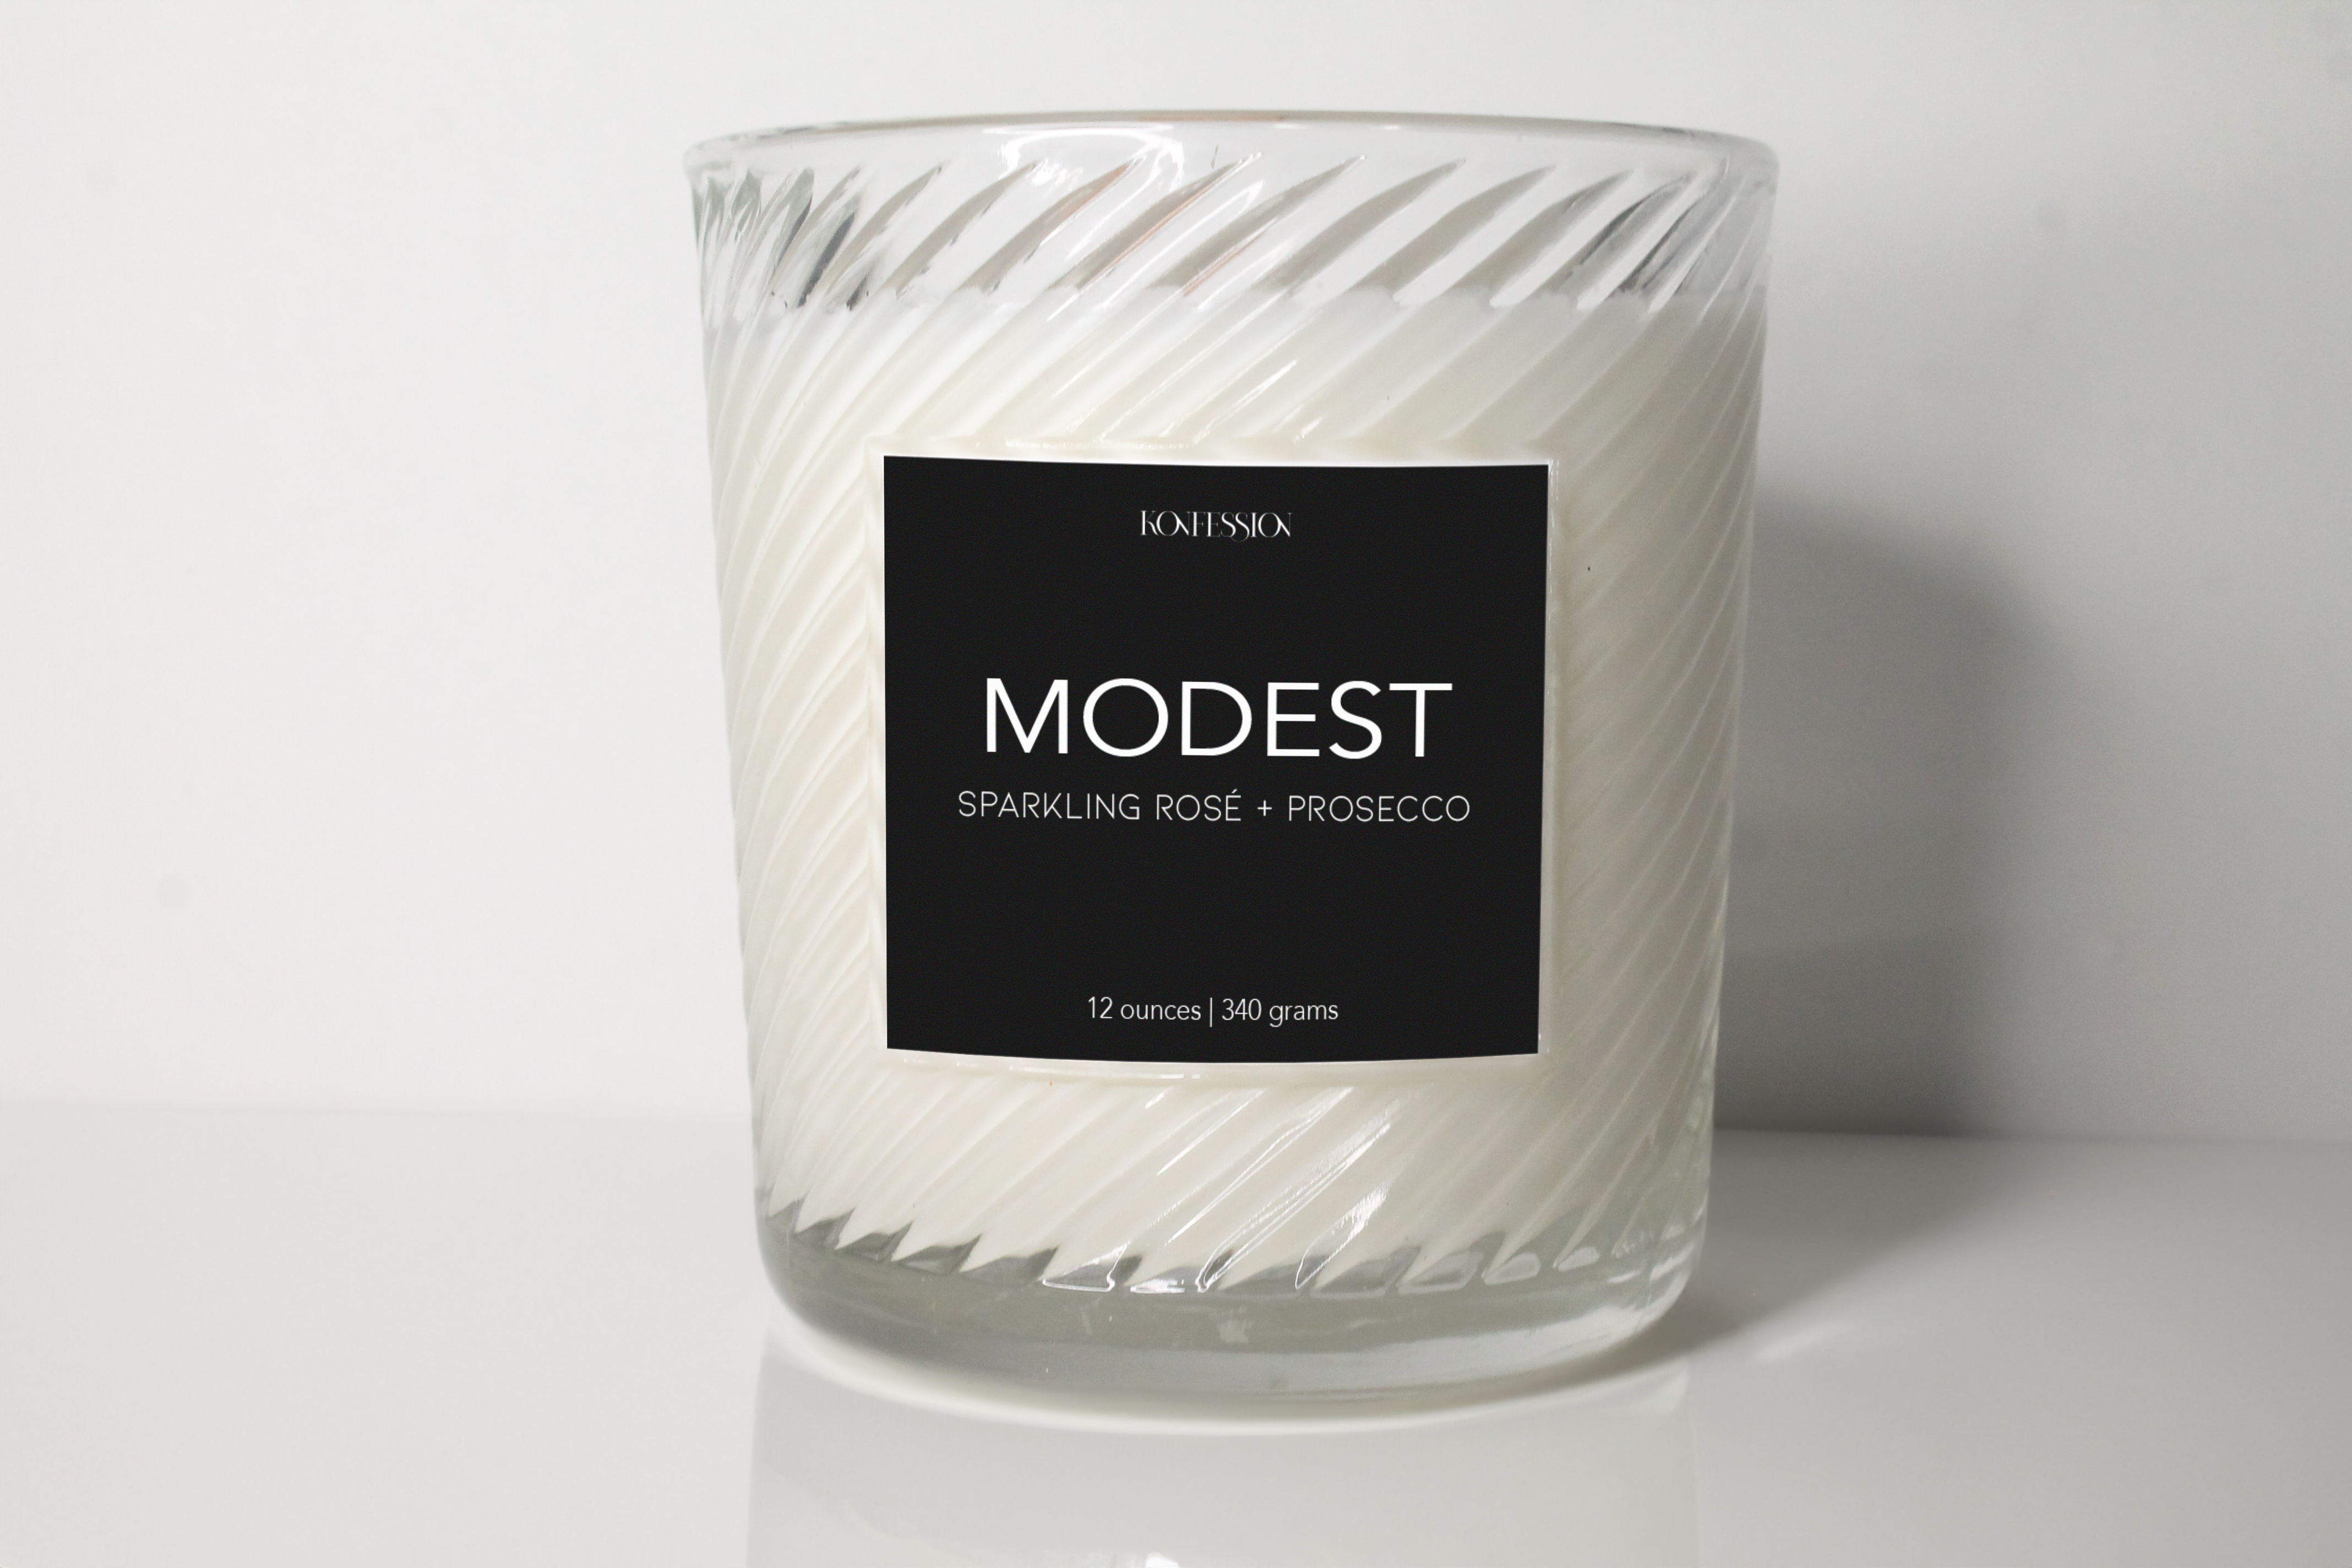 12 ounce soy wax candle. The candle is called Modest and it is a sparkling rose and prosecco scent. It has a black label on ribbed clear glass vessel.